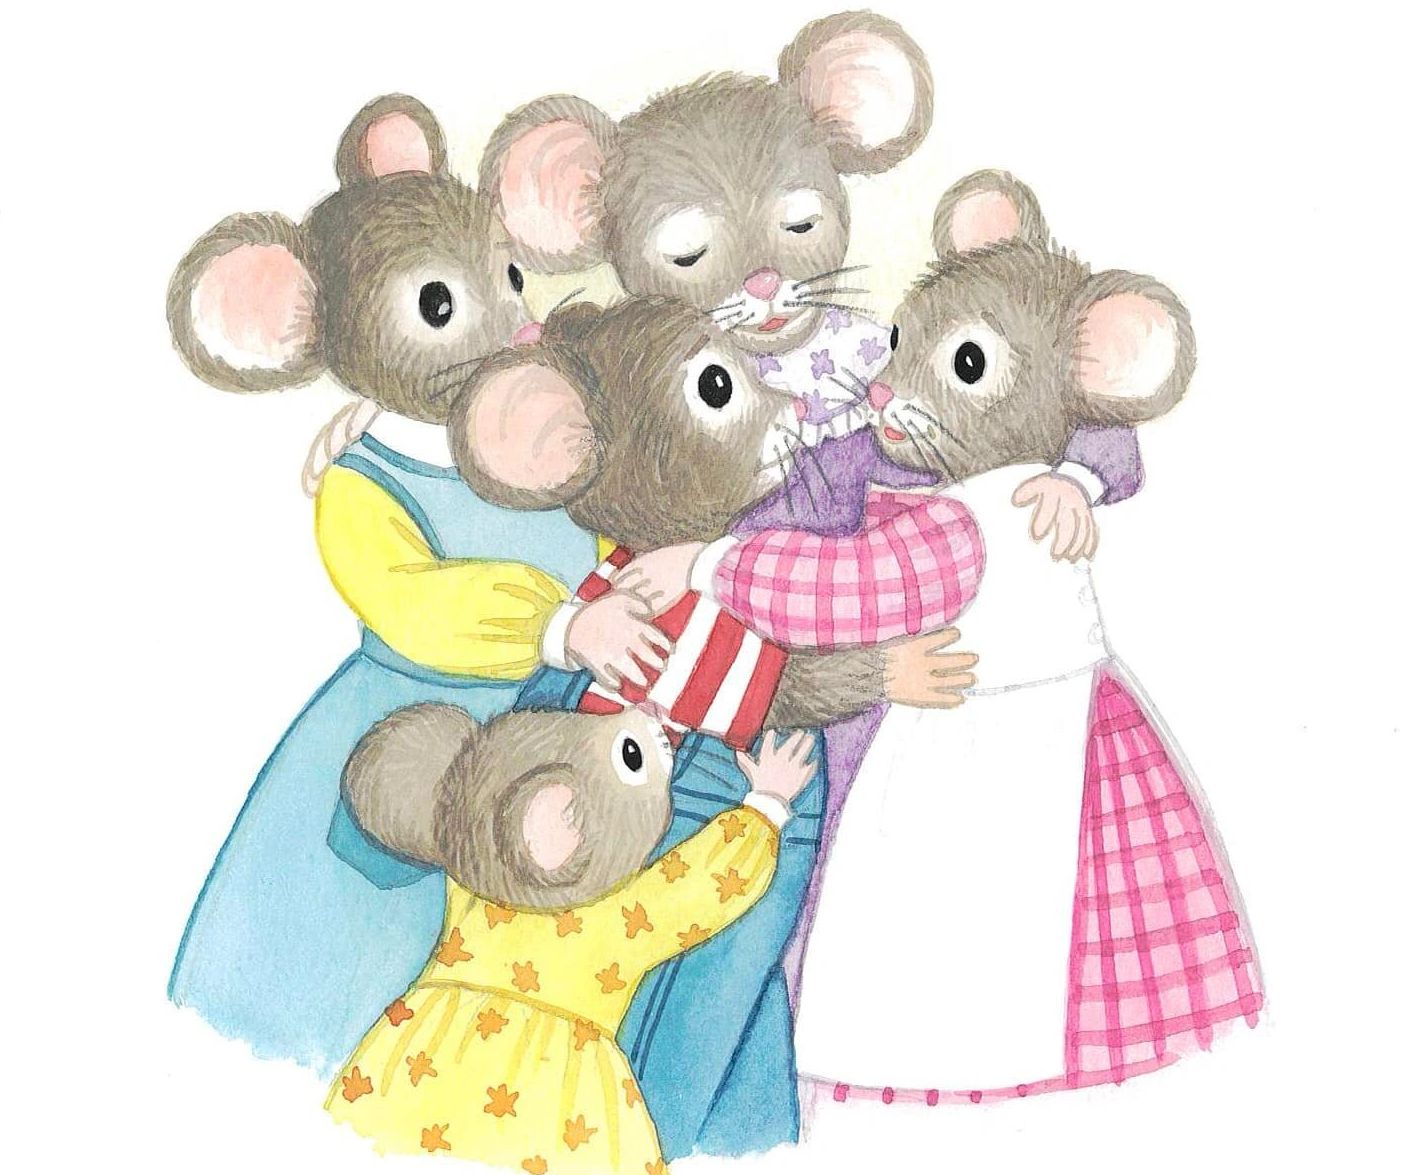 Jolley Mouse family hug. Mouse family group hug. Sweet times and Family love. Jolley is safely home